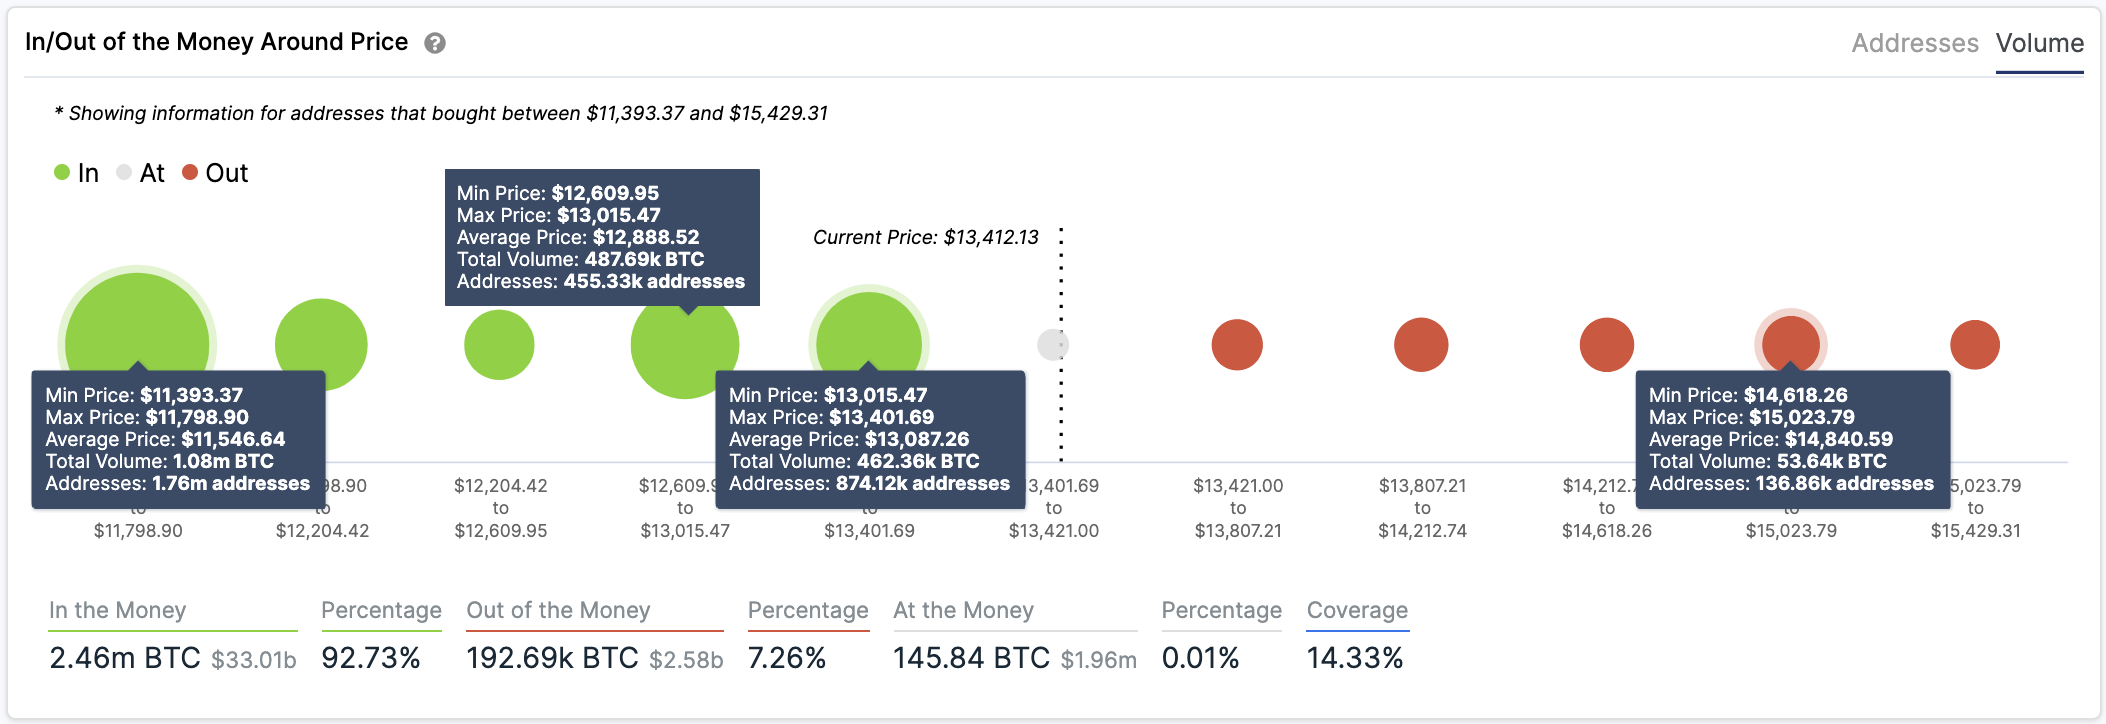 BTC's In/Out of the Money Around Price by IntoTheBlock